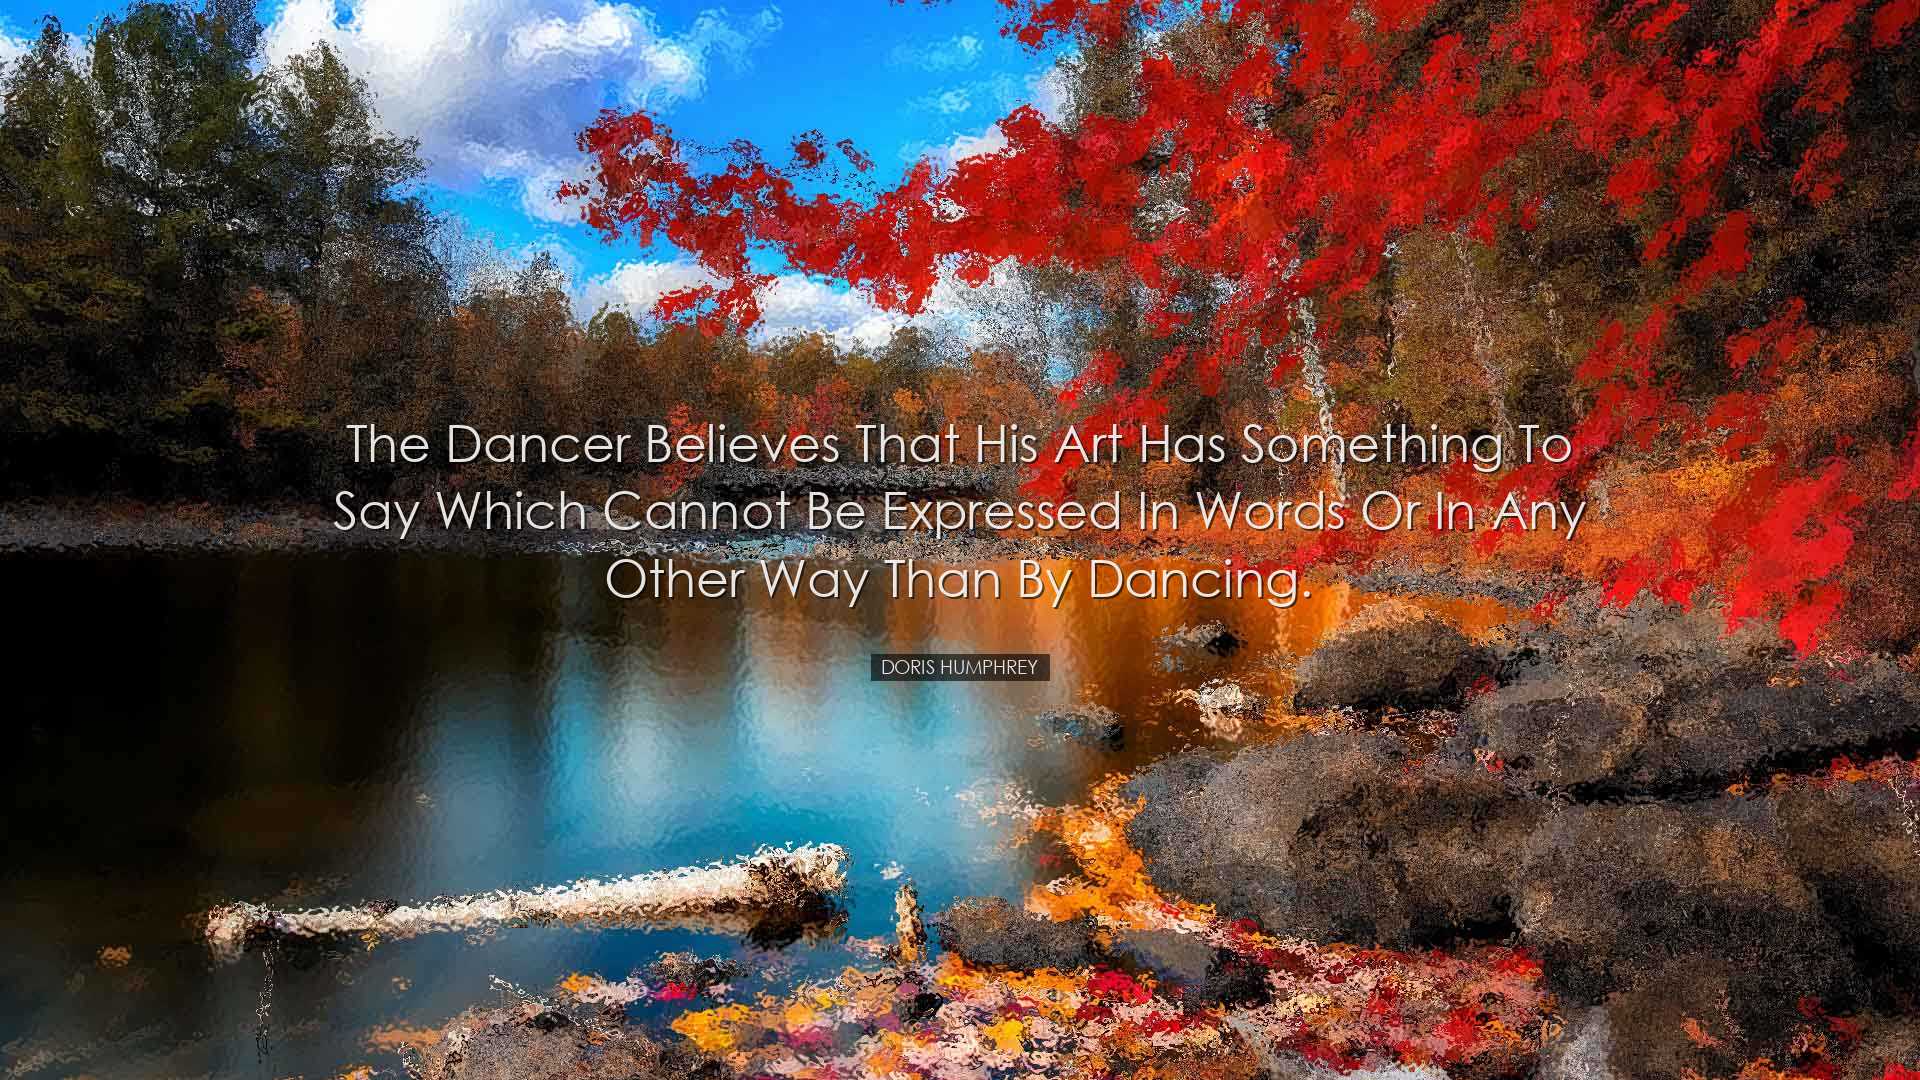 The Dancer believes that his art has something to say which cannot